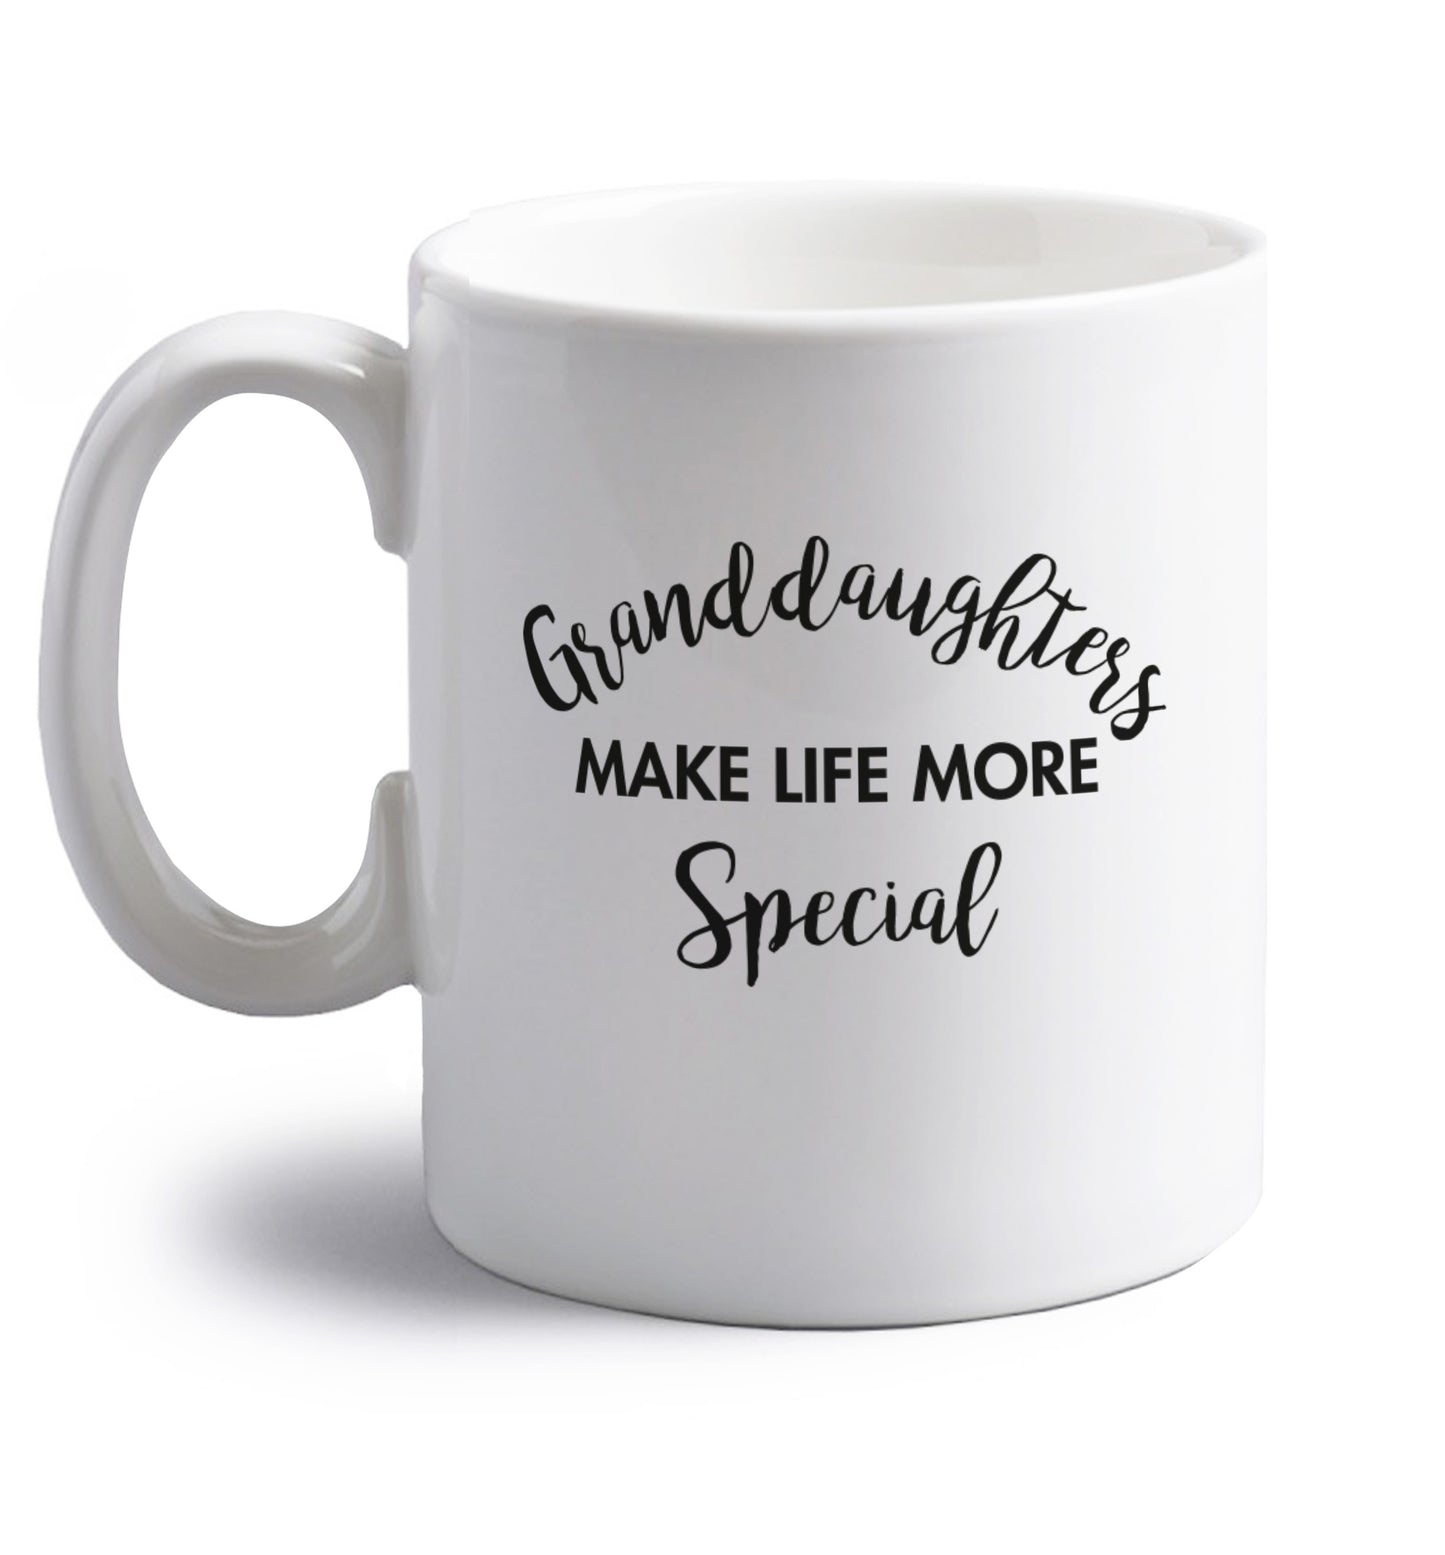 Granddaughters make life more special right handed white ceramic mug 